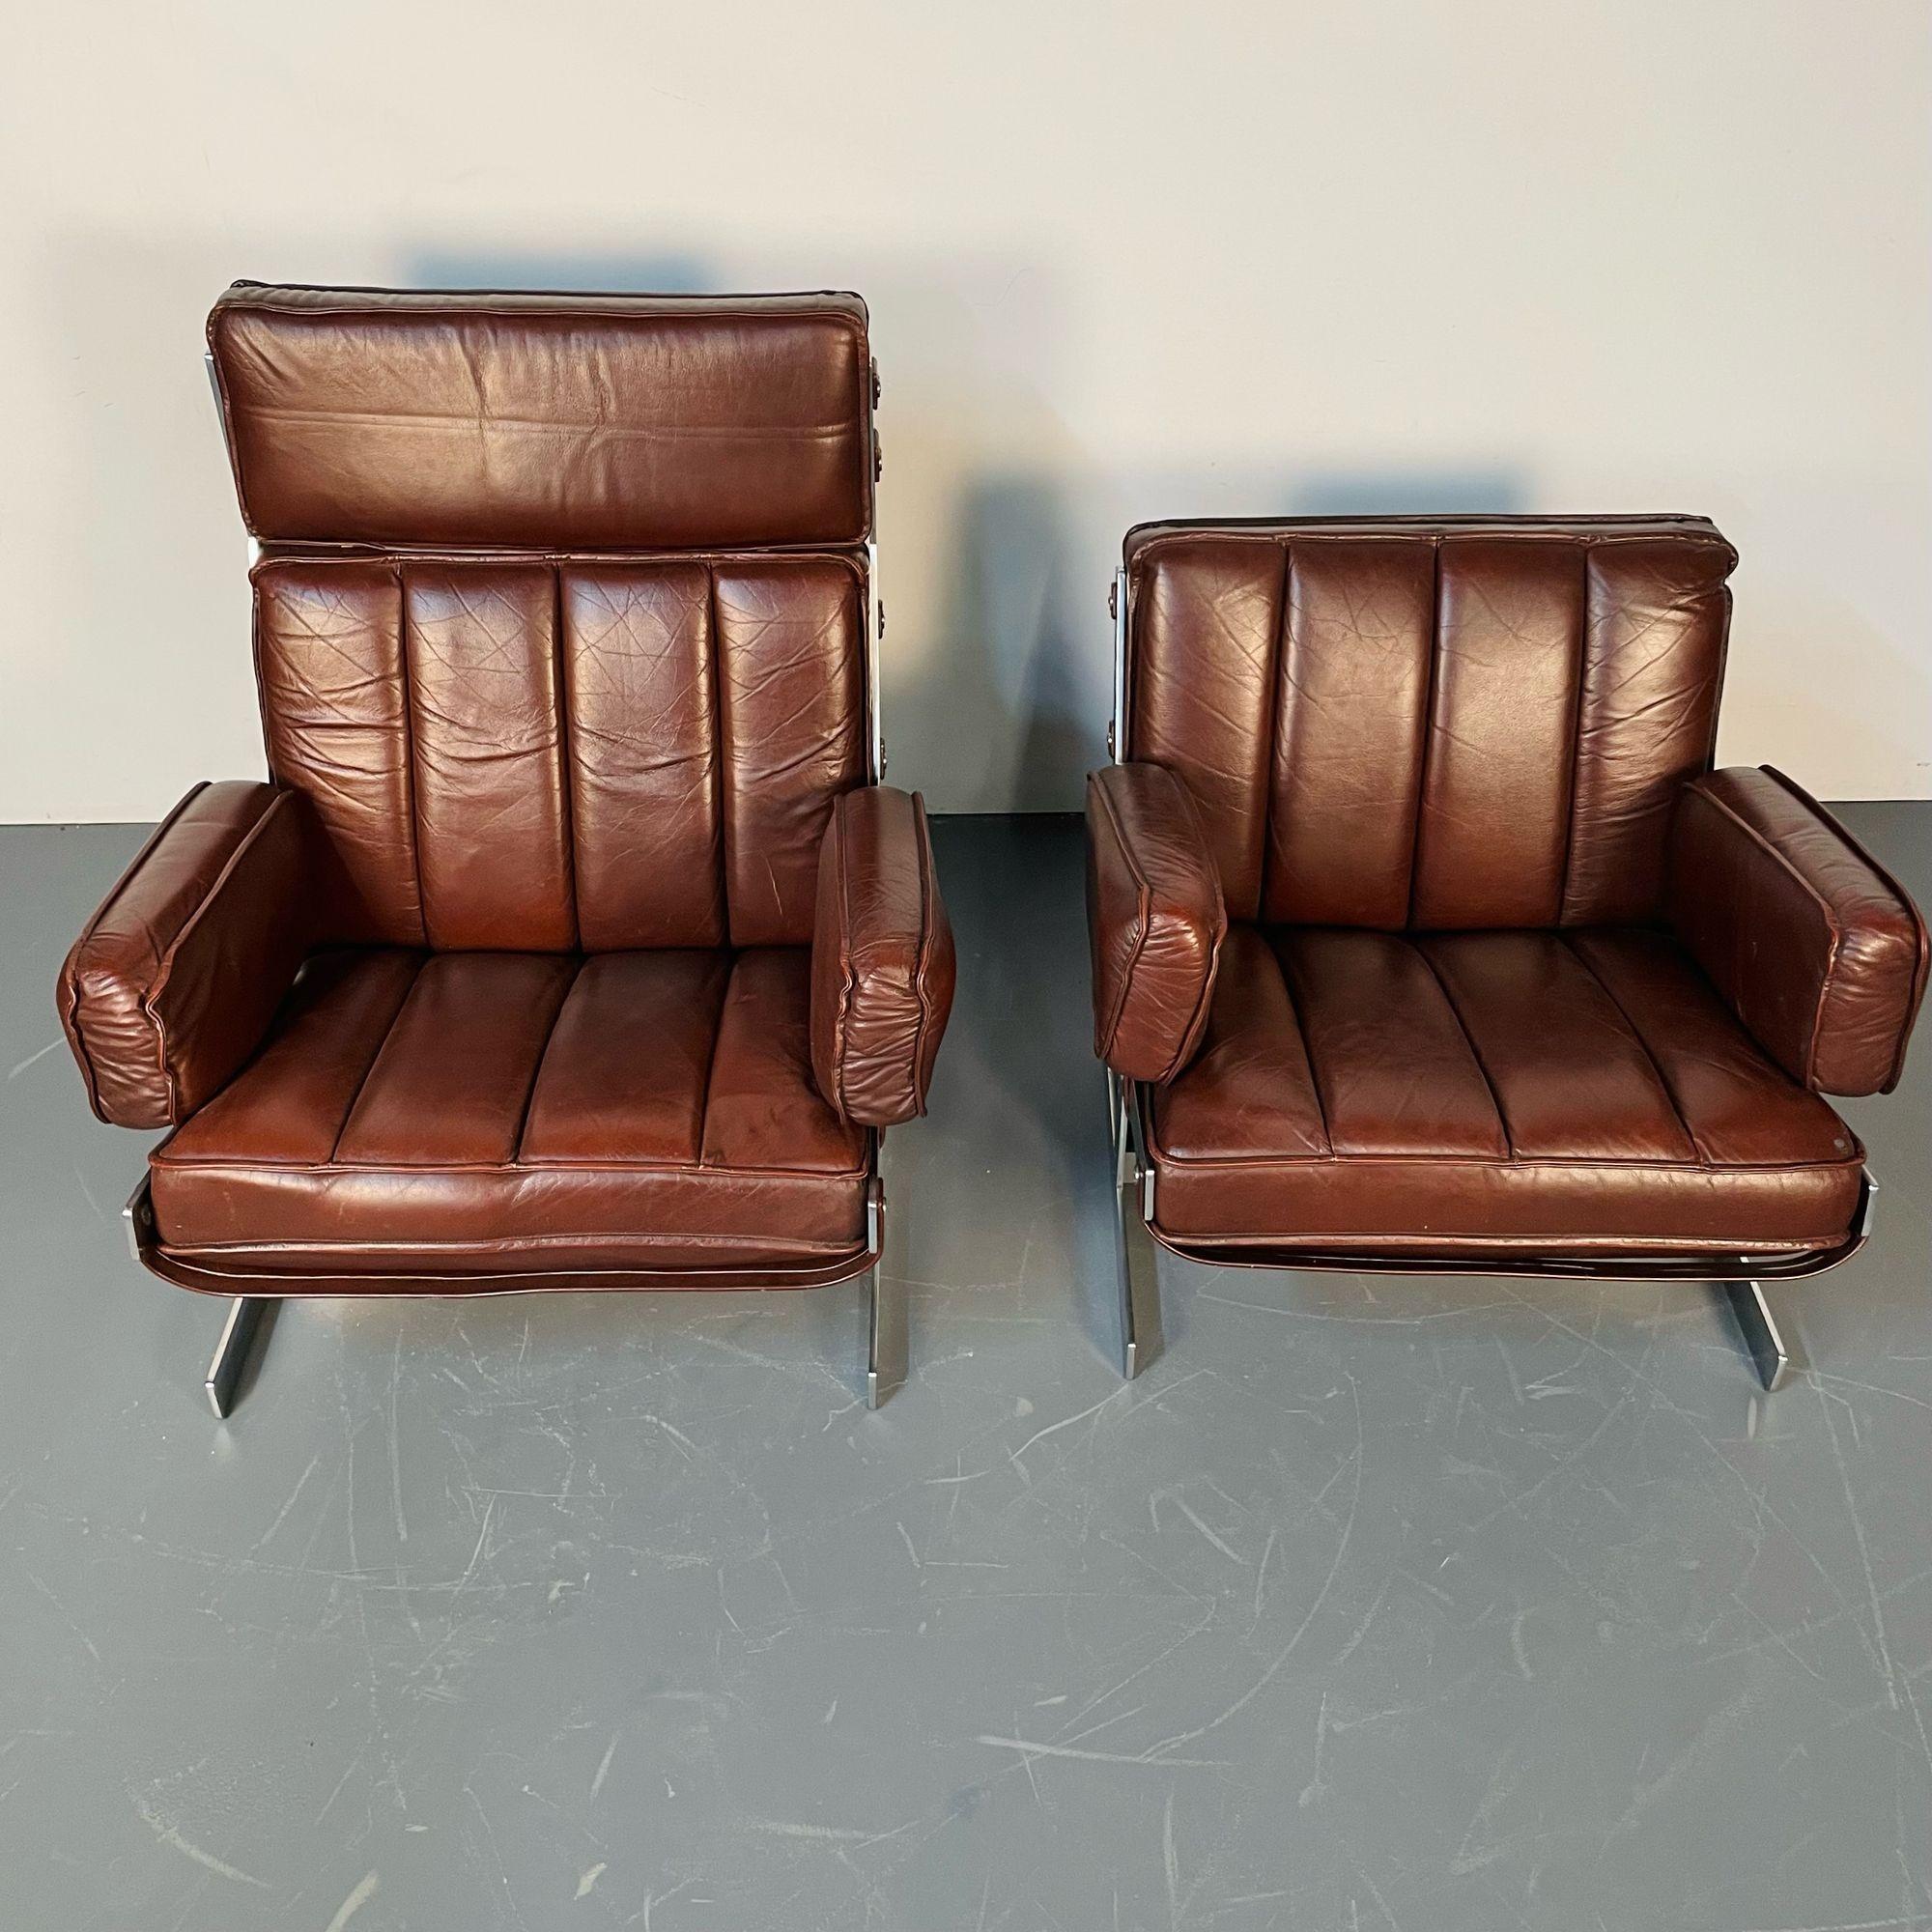 Arne Norell, Swedish Mid-Century Modern Lounge Chairs, Leather, Steel, 1960s For Sale 4